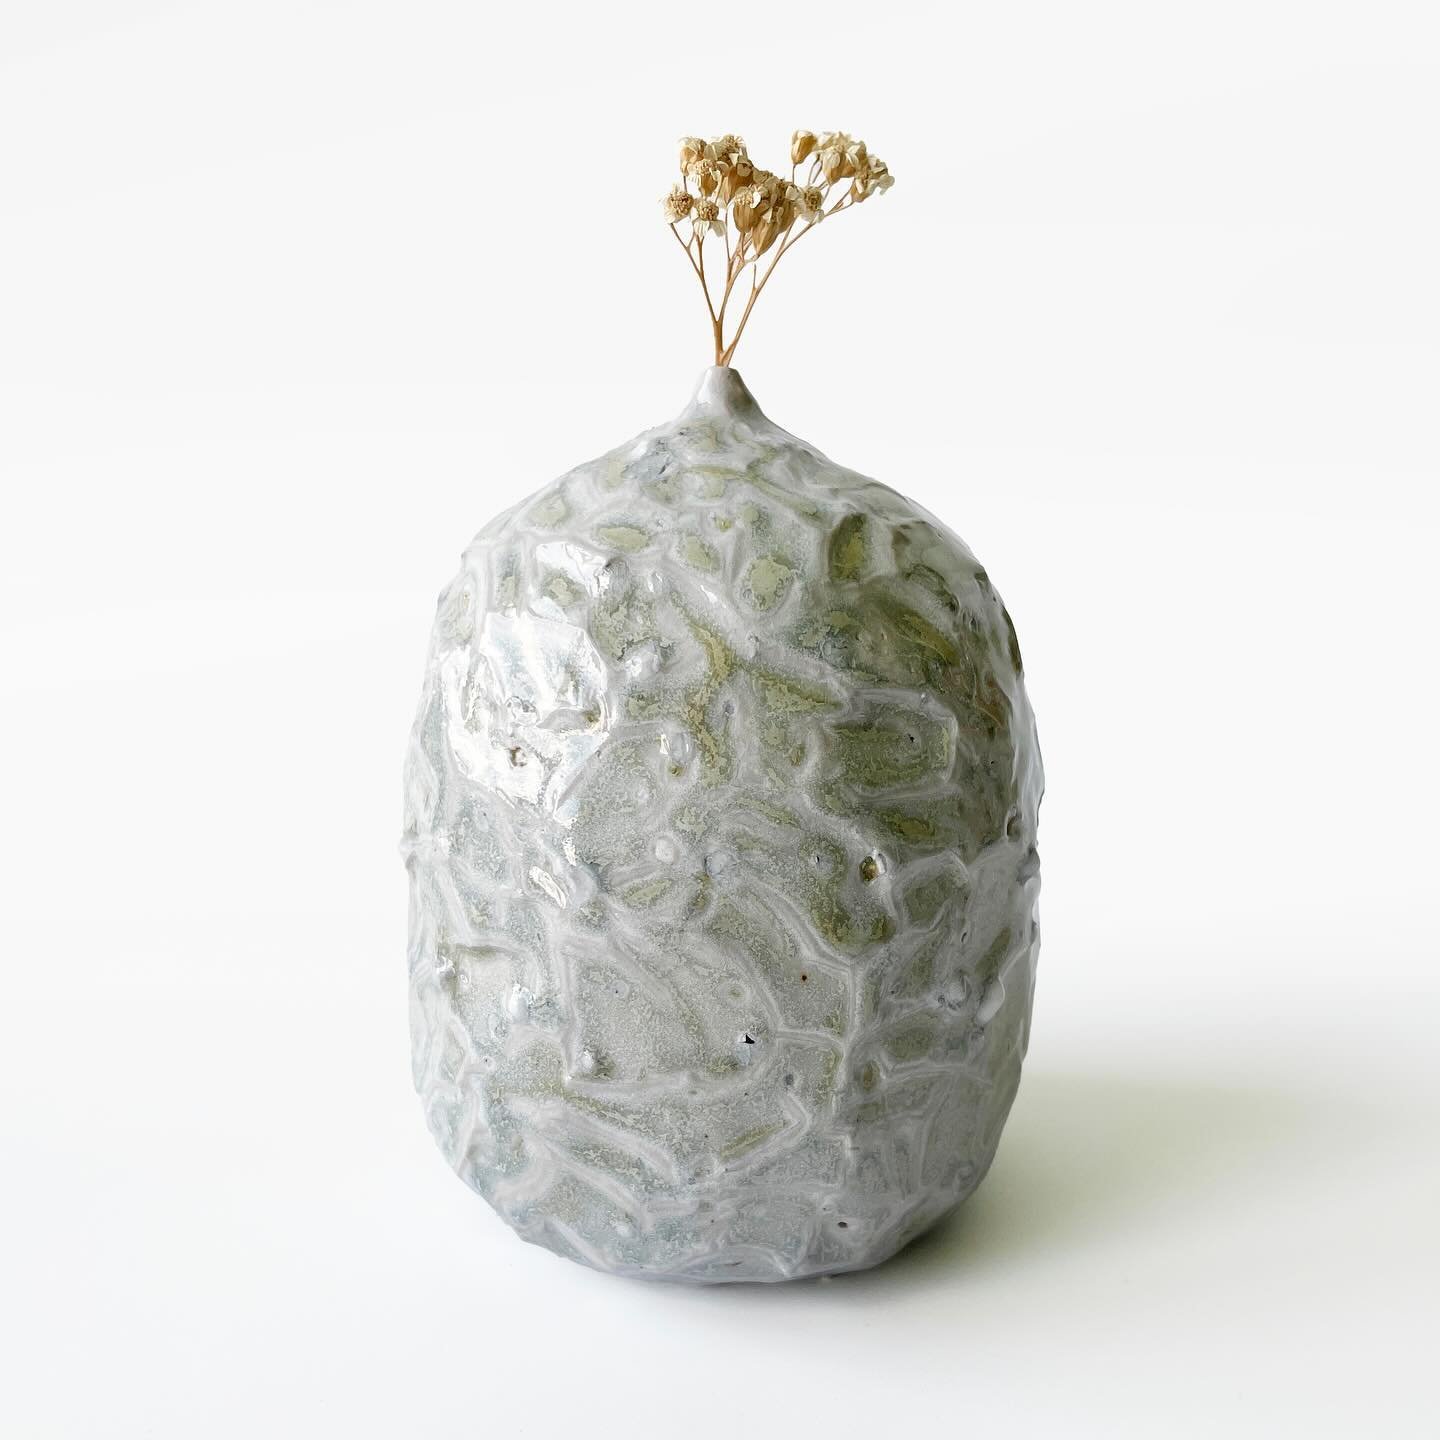 This beauty is fresh from the soda kiln for #weedpotwednesday

Some exciting things are happening this month:

Small Favors opens tomorrow @theclaystudiophl Over 500 small works of art will be on view, including 3 of my pieces. The show runs until Ju